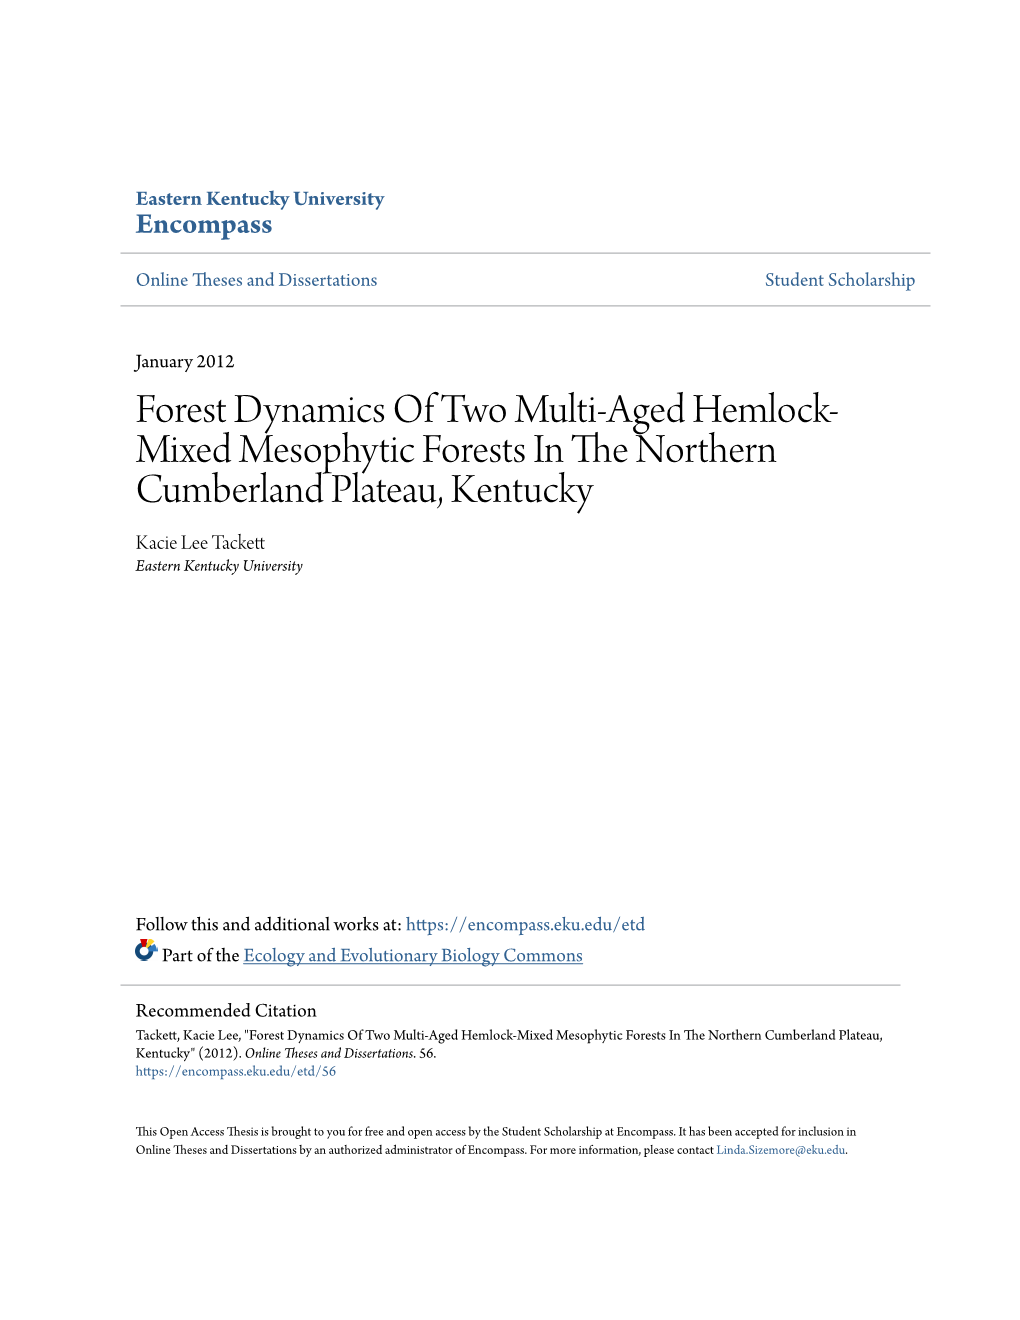 Forest Dynamics of Two Multi-Aged Hemlock-Mixed Mesophytic Forests in the Orn Thern Cumberland Plateau, Kentucky" (2012)